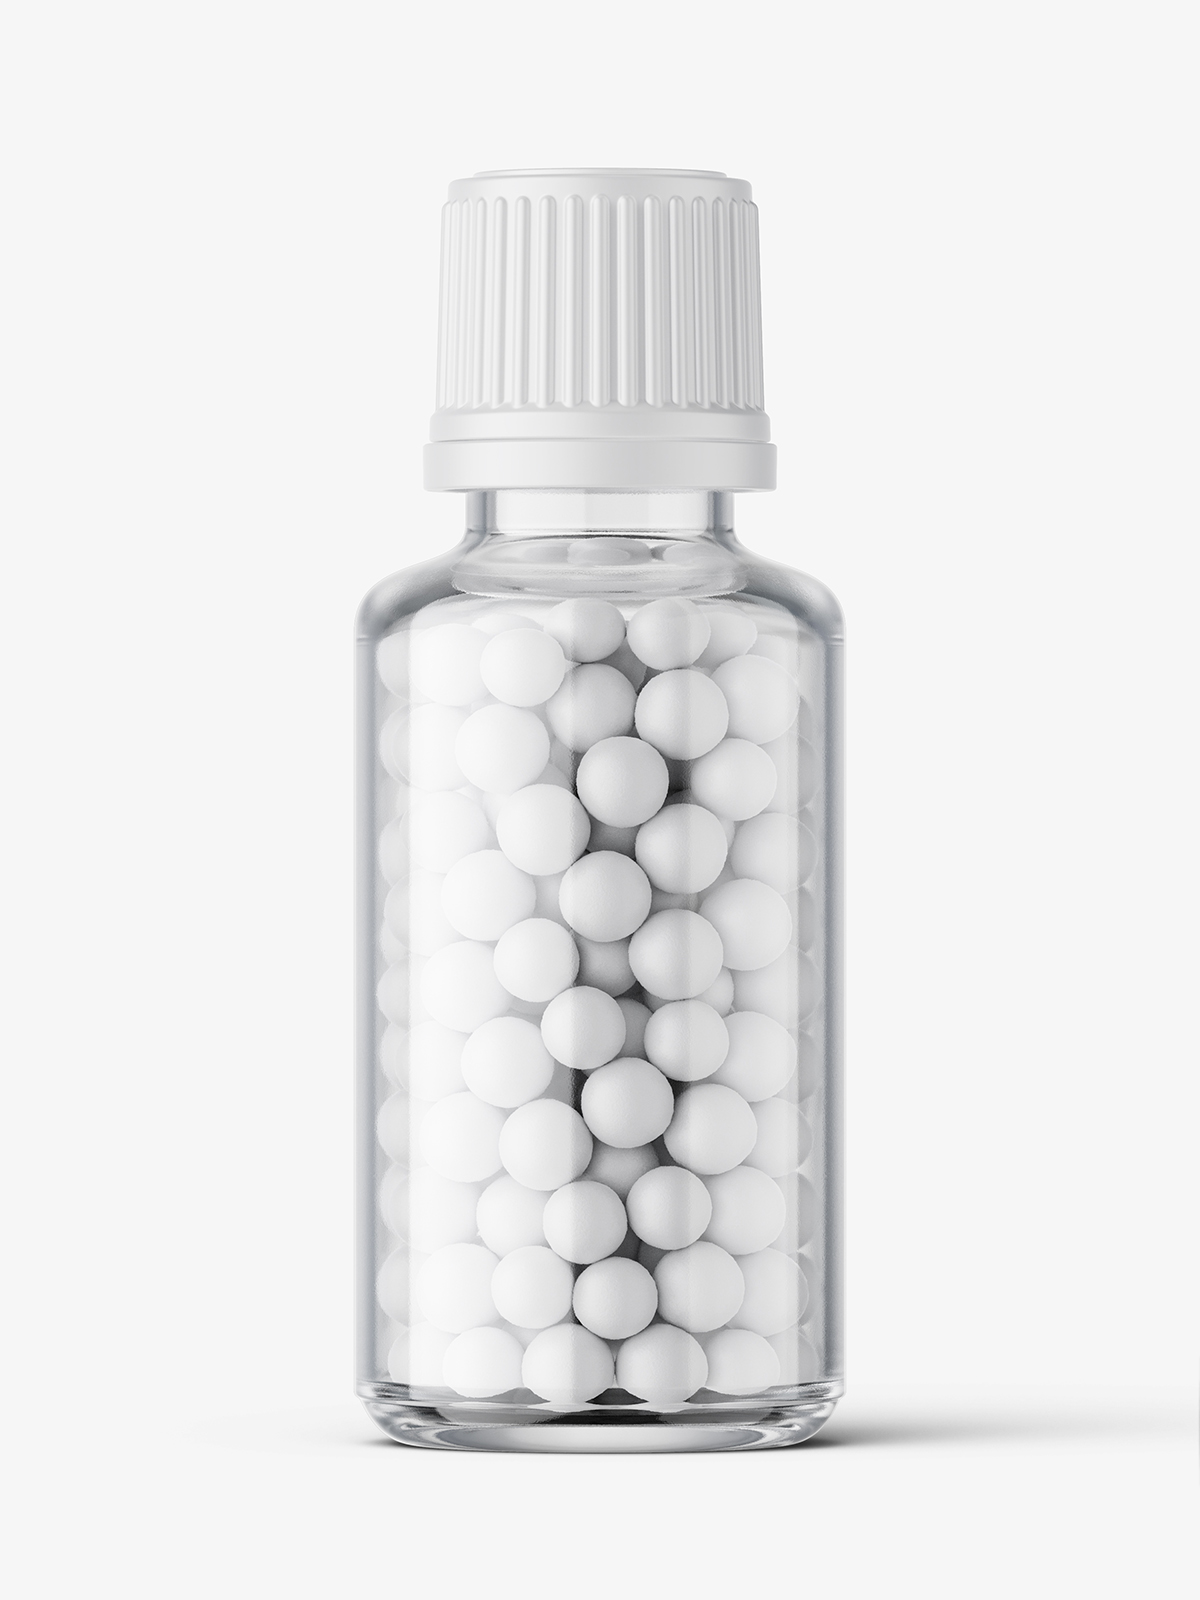 Download Clear Bottle With Pills Mockup 30 Ml Smarty Mockups